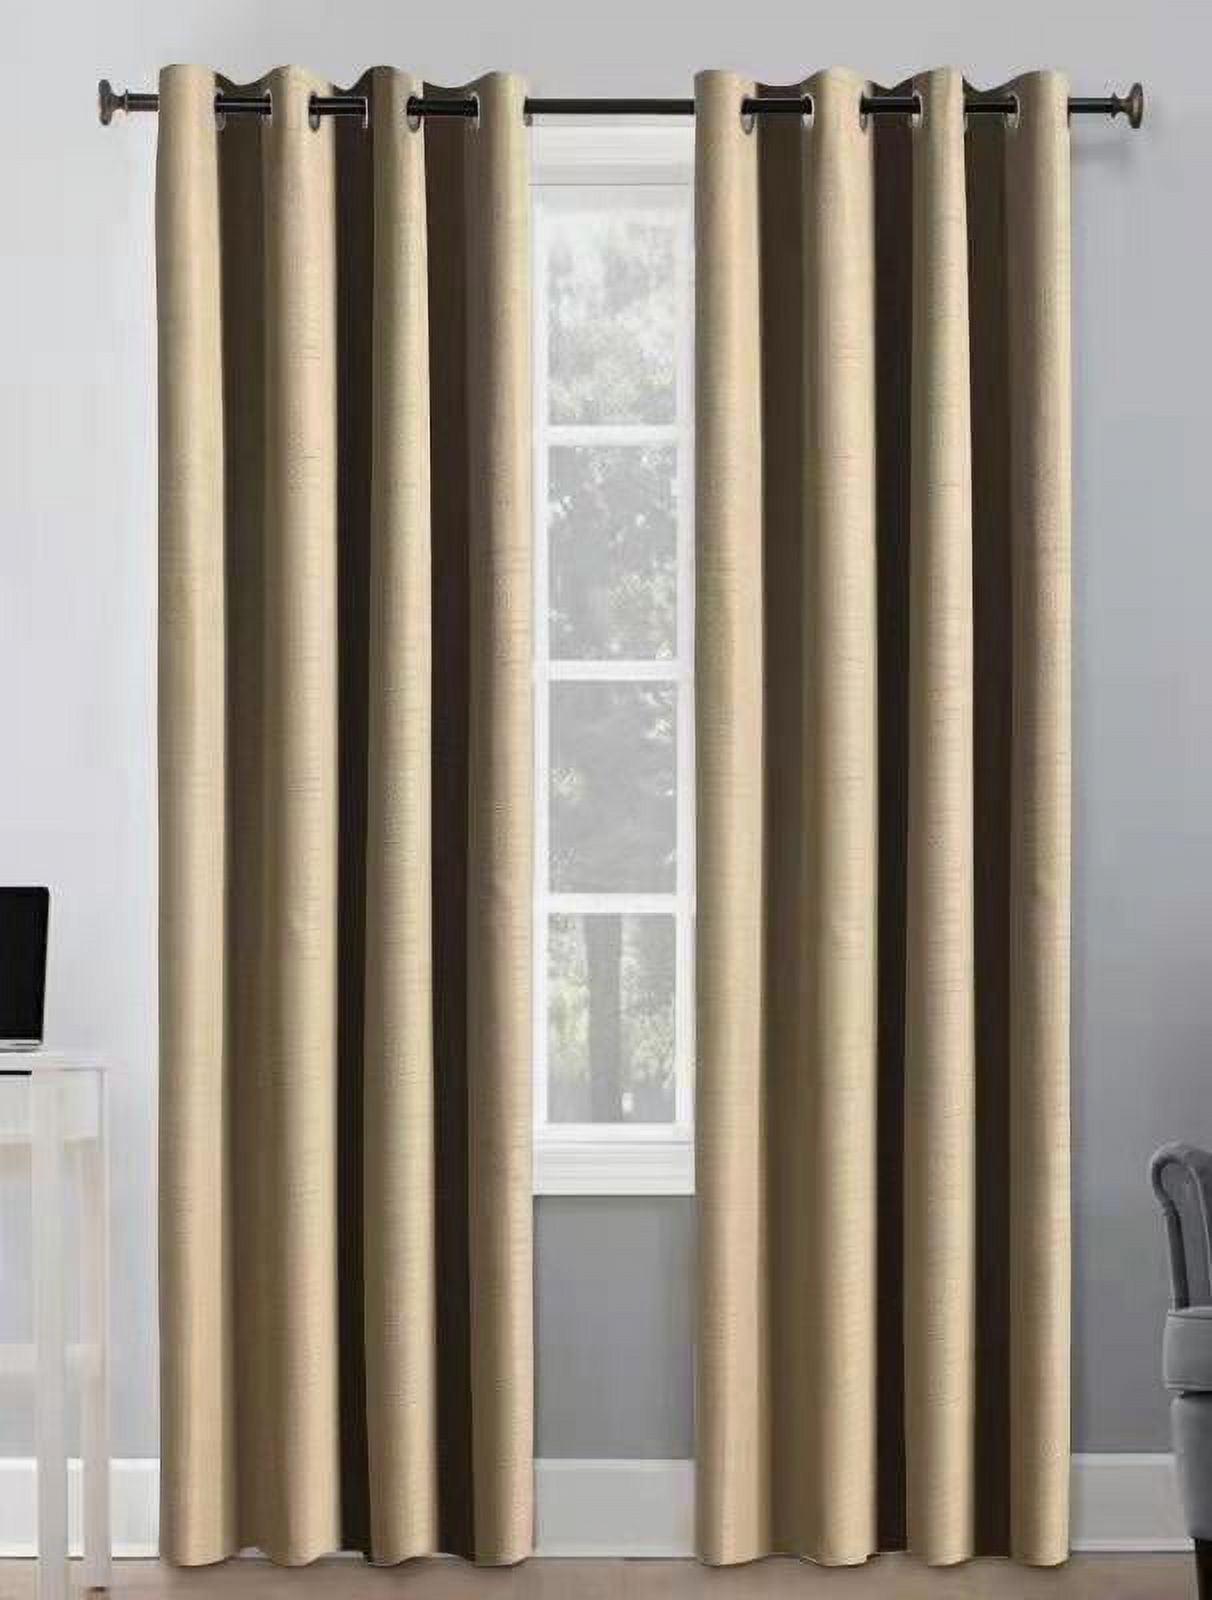 Better Homes & Gardens Basketweave Curtain Panel, 50" x 84", Beige - image 1 of 6